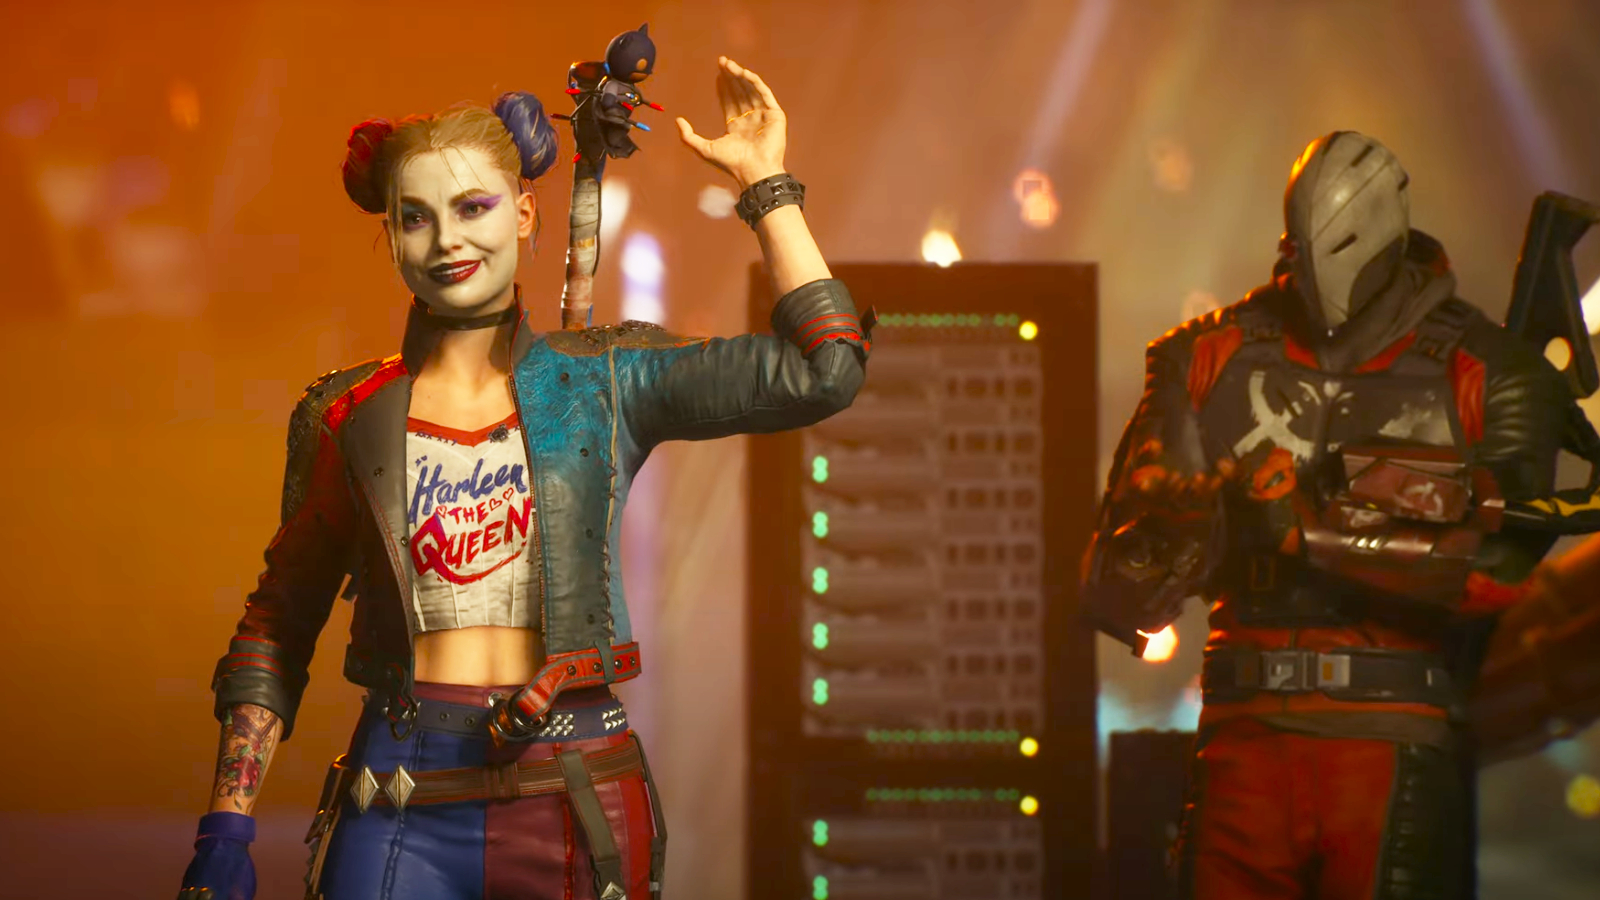 Suicide Squad: Kill the Justice League gameplay videos have leaked